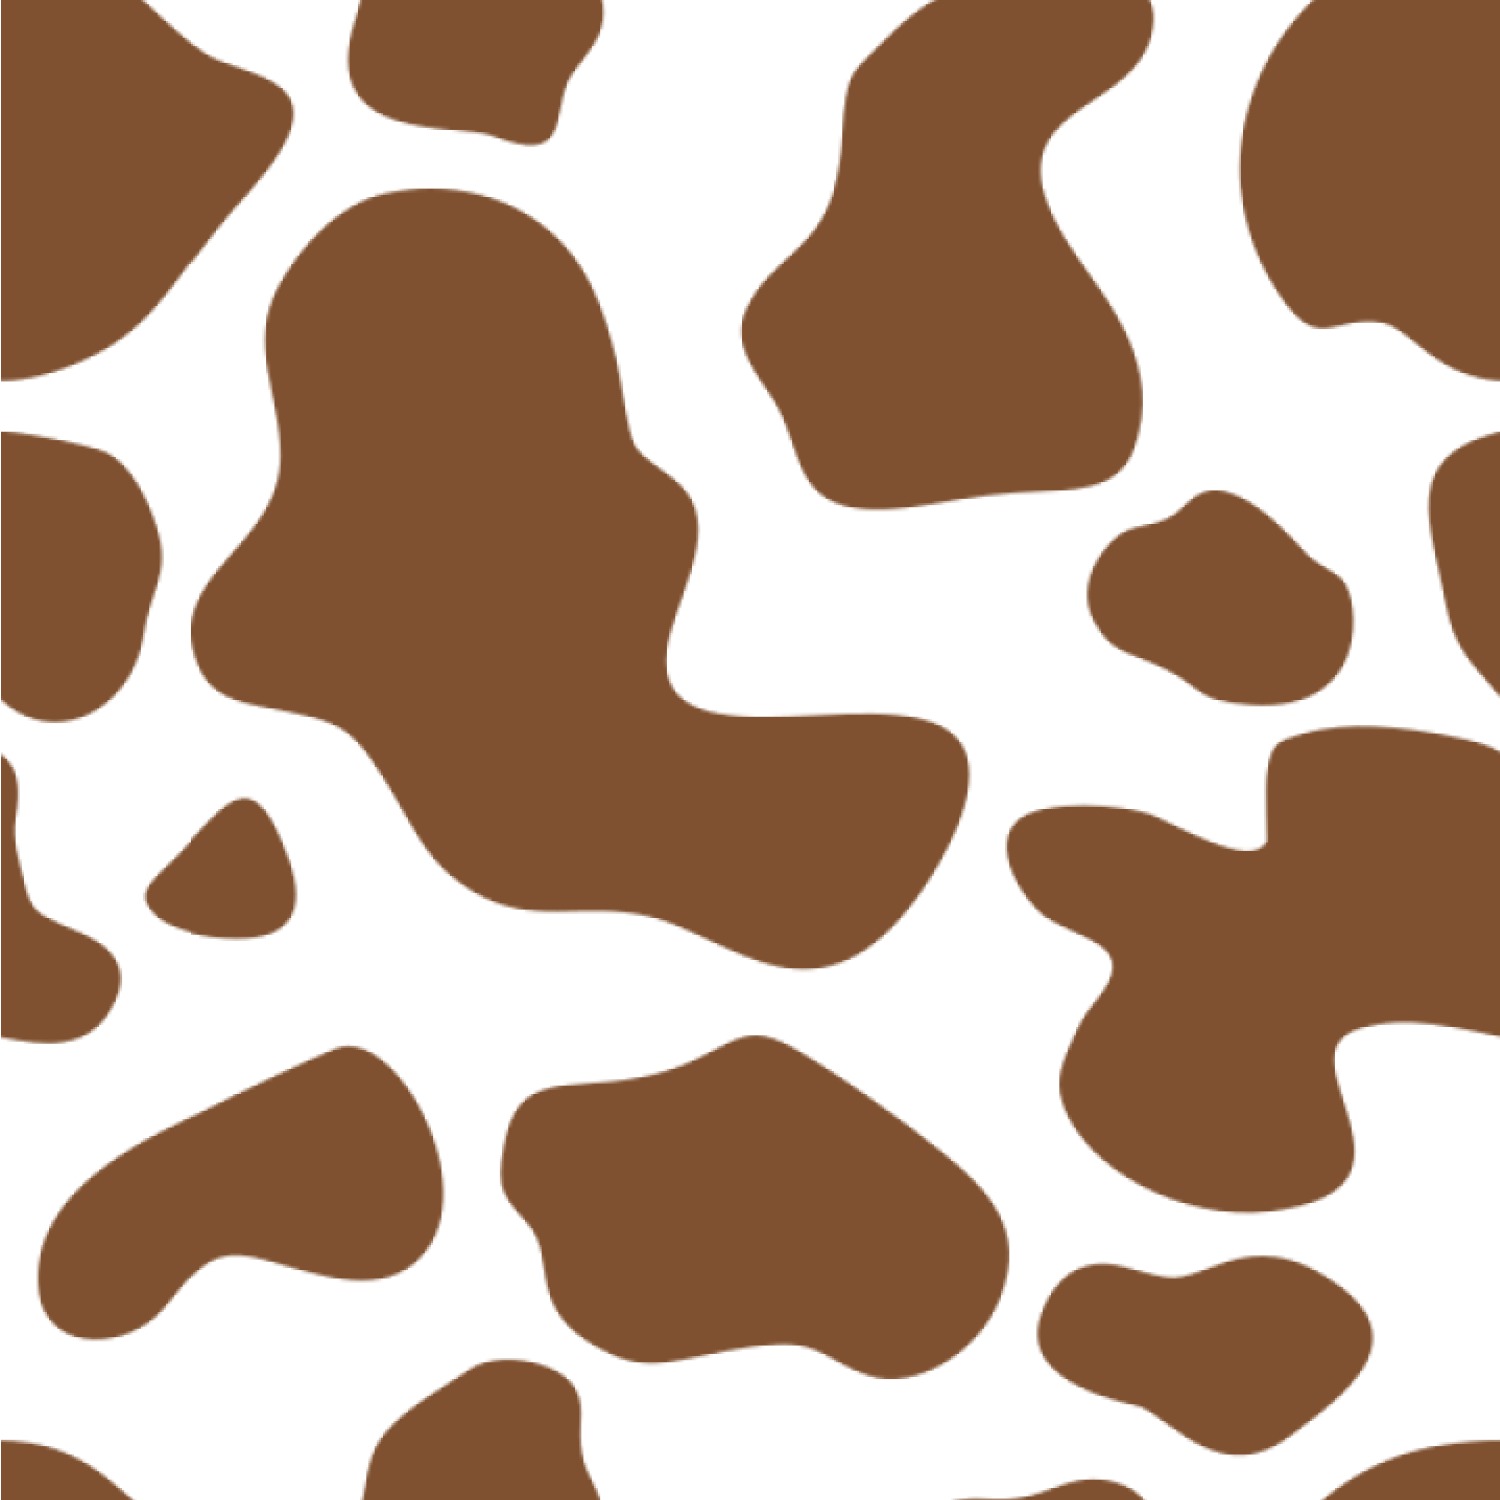 Where To Use Cow Print Wallpaper